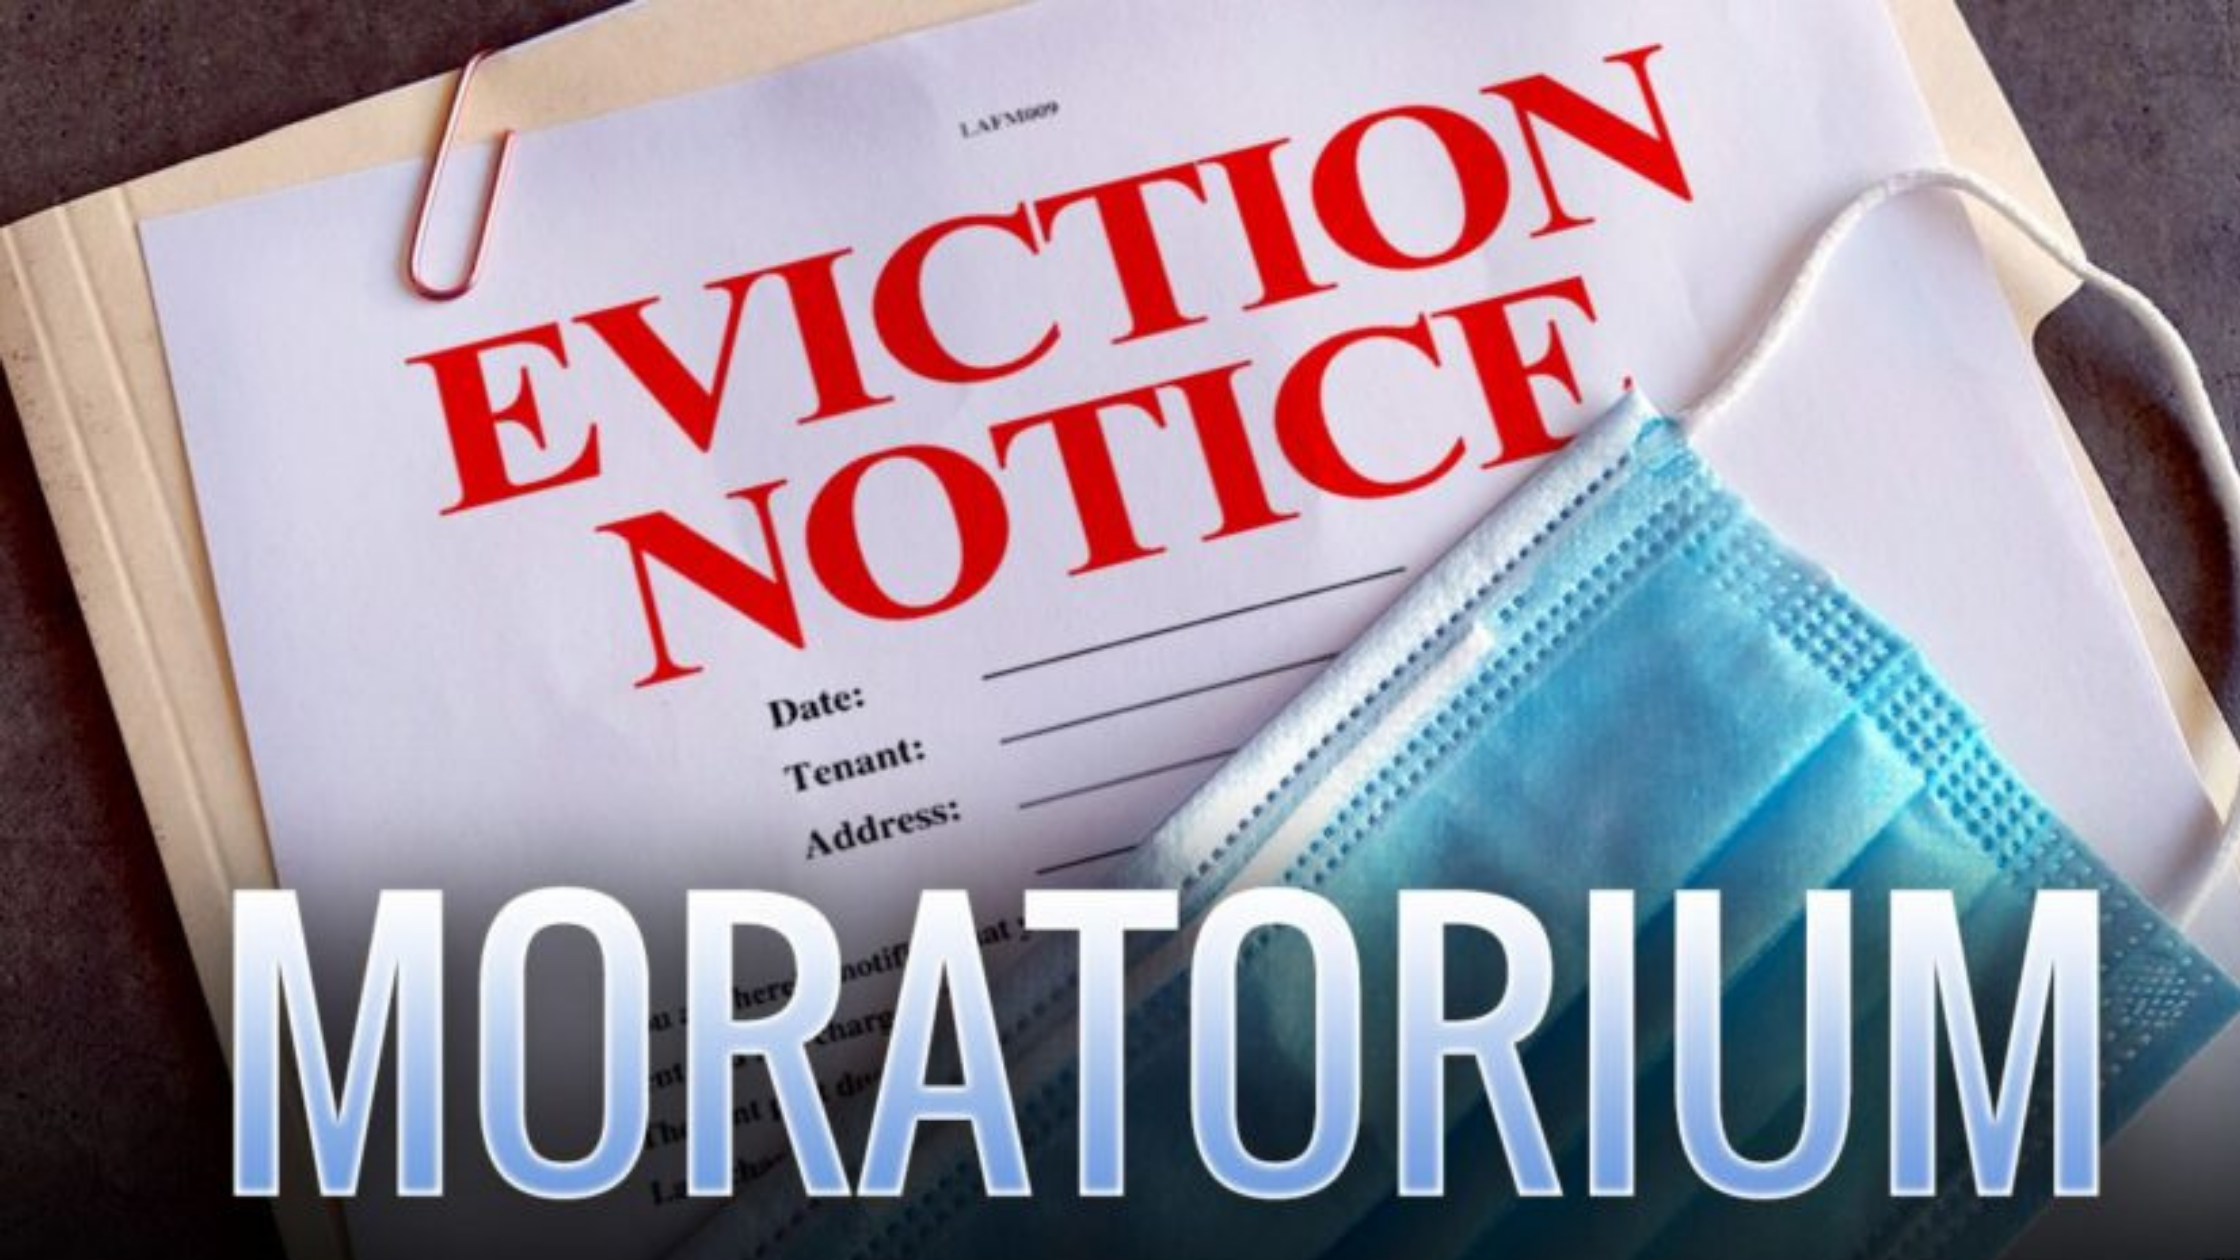 Update on Covid-19 Eviction Moratorium for Illinois | December 28, 2020